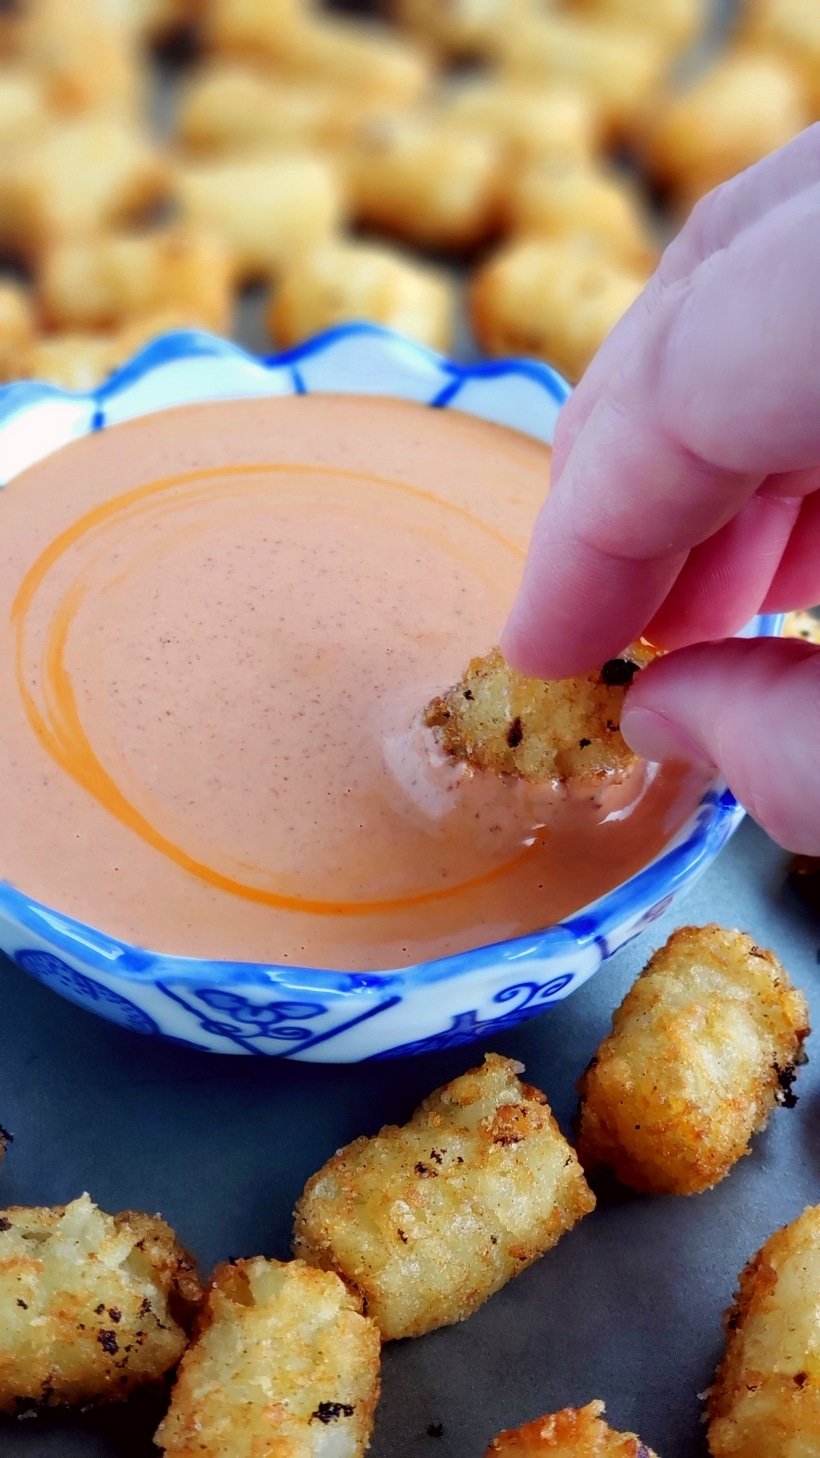 Hand dipping a tater tot into dipping sauce surrounded by tots.